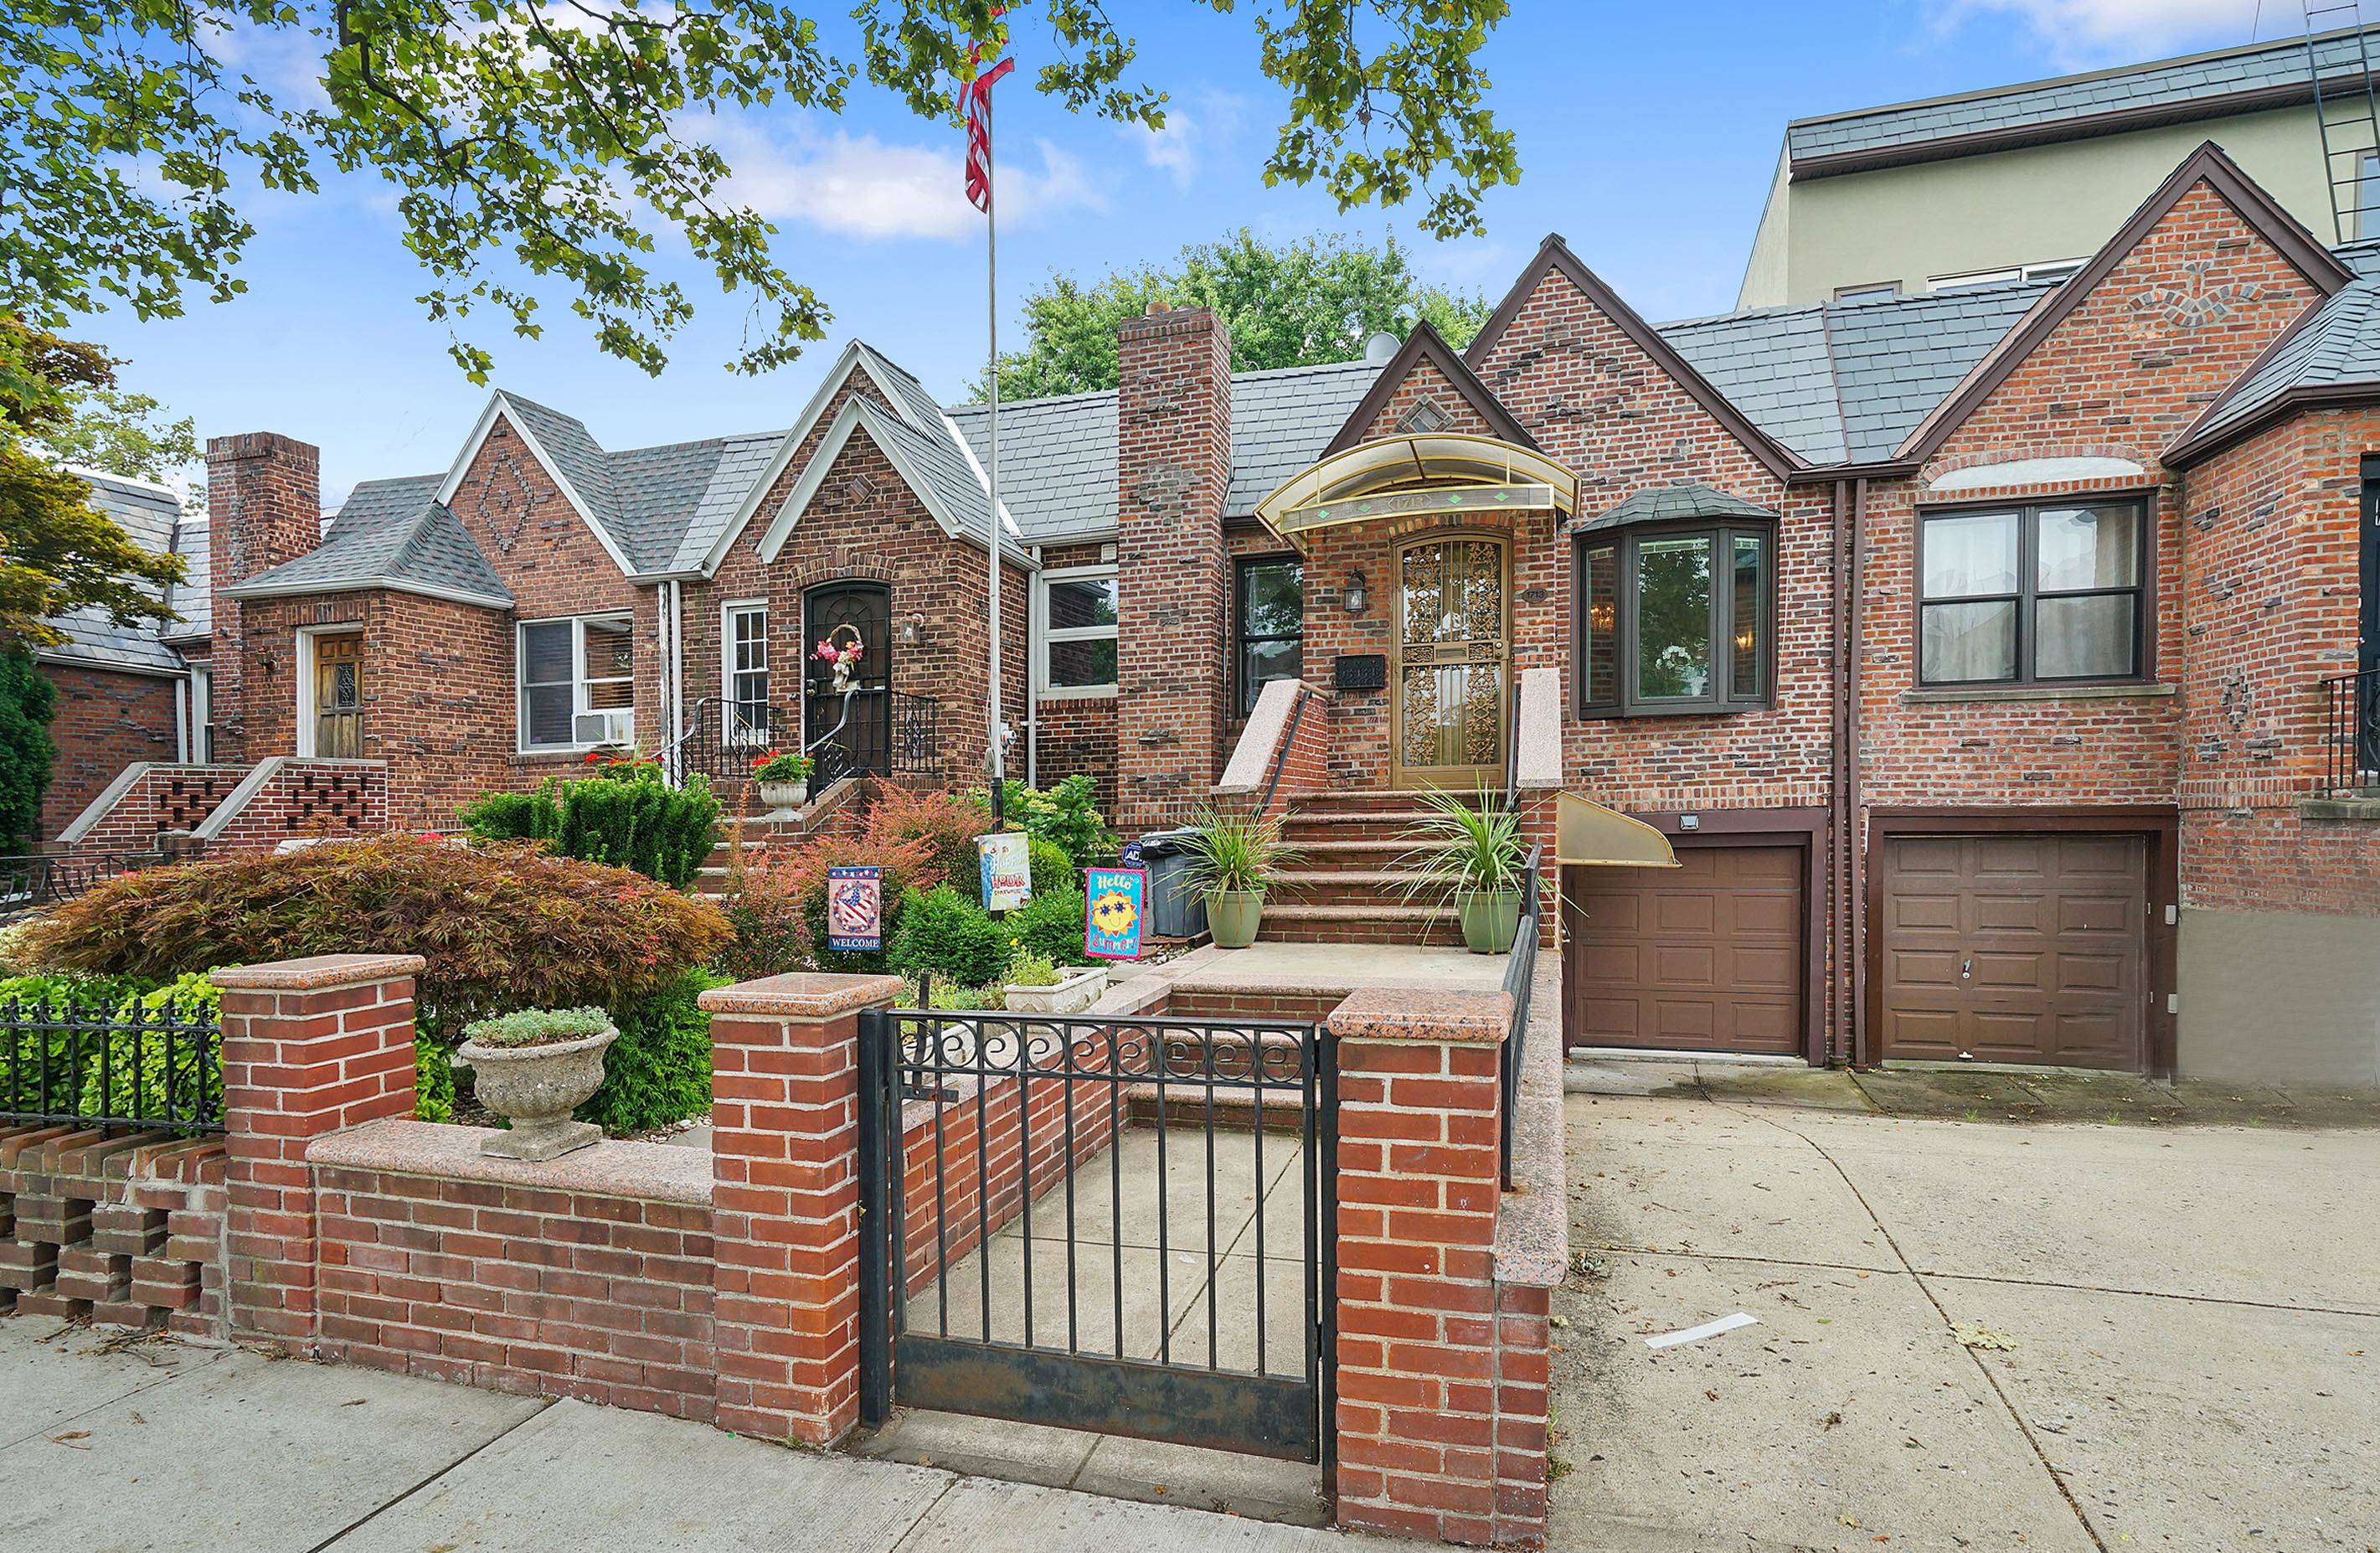 BEAUTIFUL 3 BR, 2 BA BRICK TOWNHOUSE W GARAGE AND PRIVATE BACKYARD, 10 MINUTES DRIVE TO NYC !